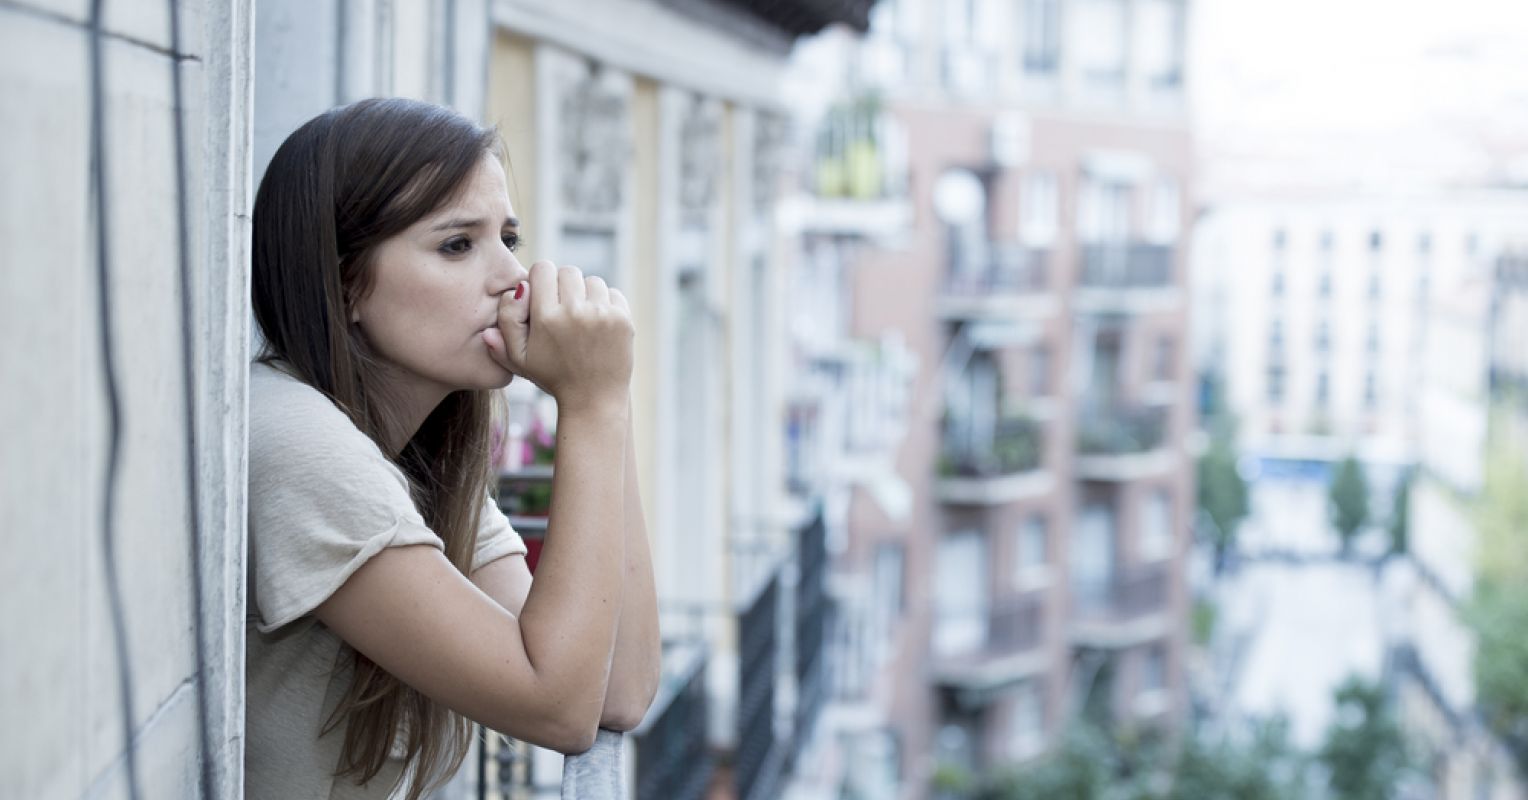 7 Tips to Engage Yourself When You're Feeling Alone